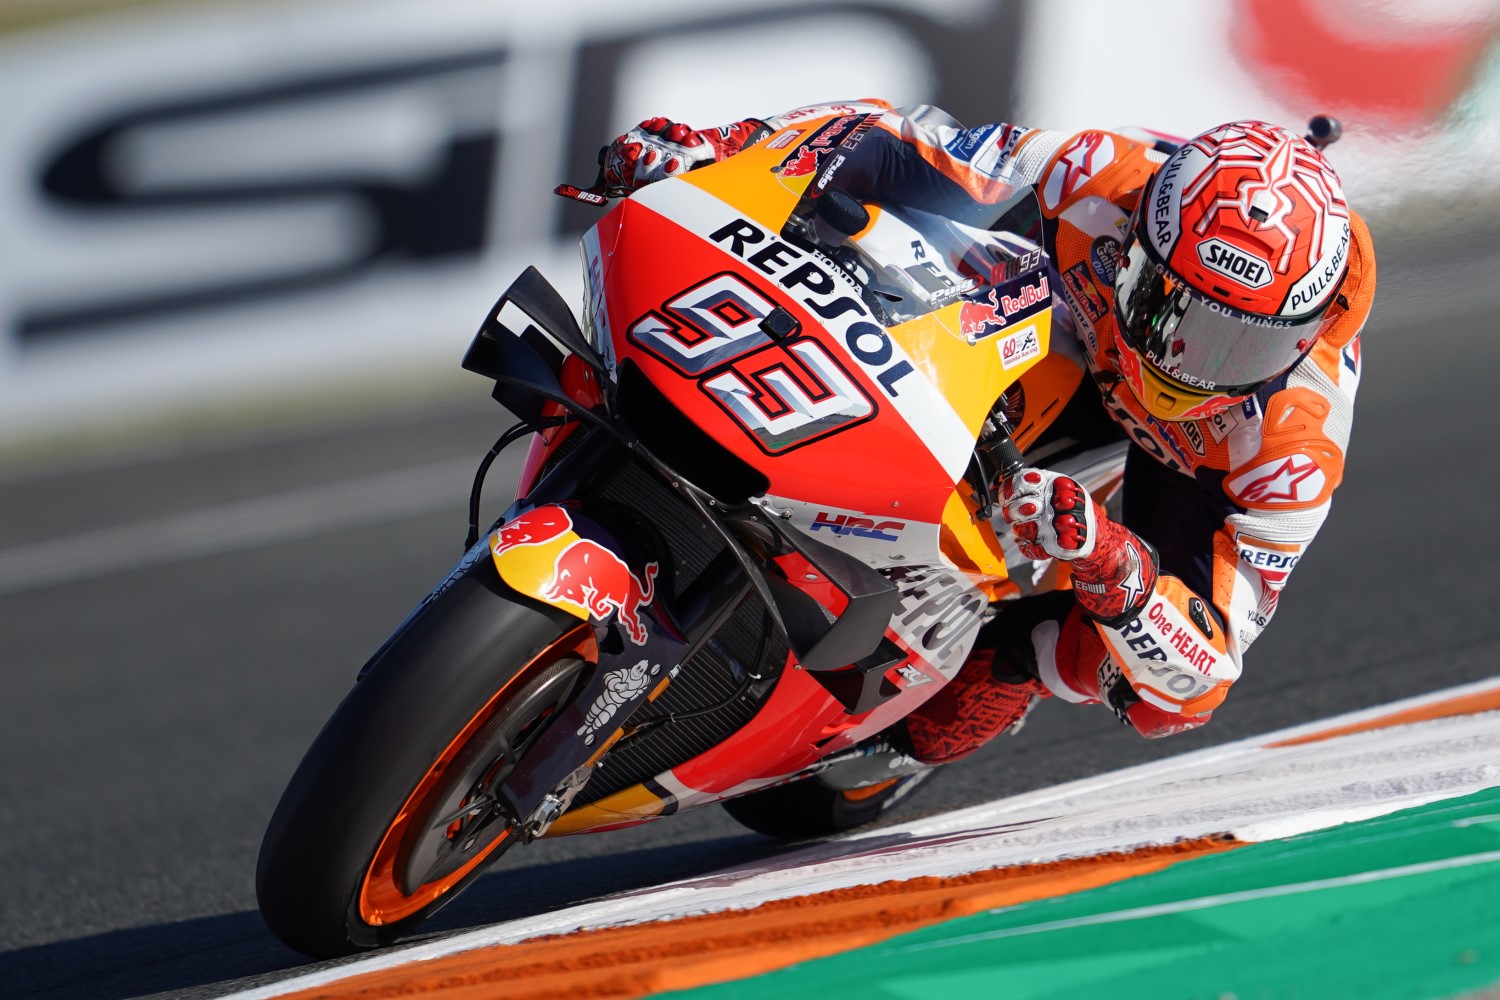 Marc Marquez wins 12th time in dominant 2019 season.  He is the best MotoGP rider of all-time without a doubt.